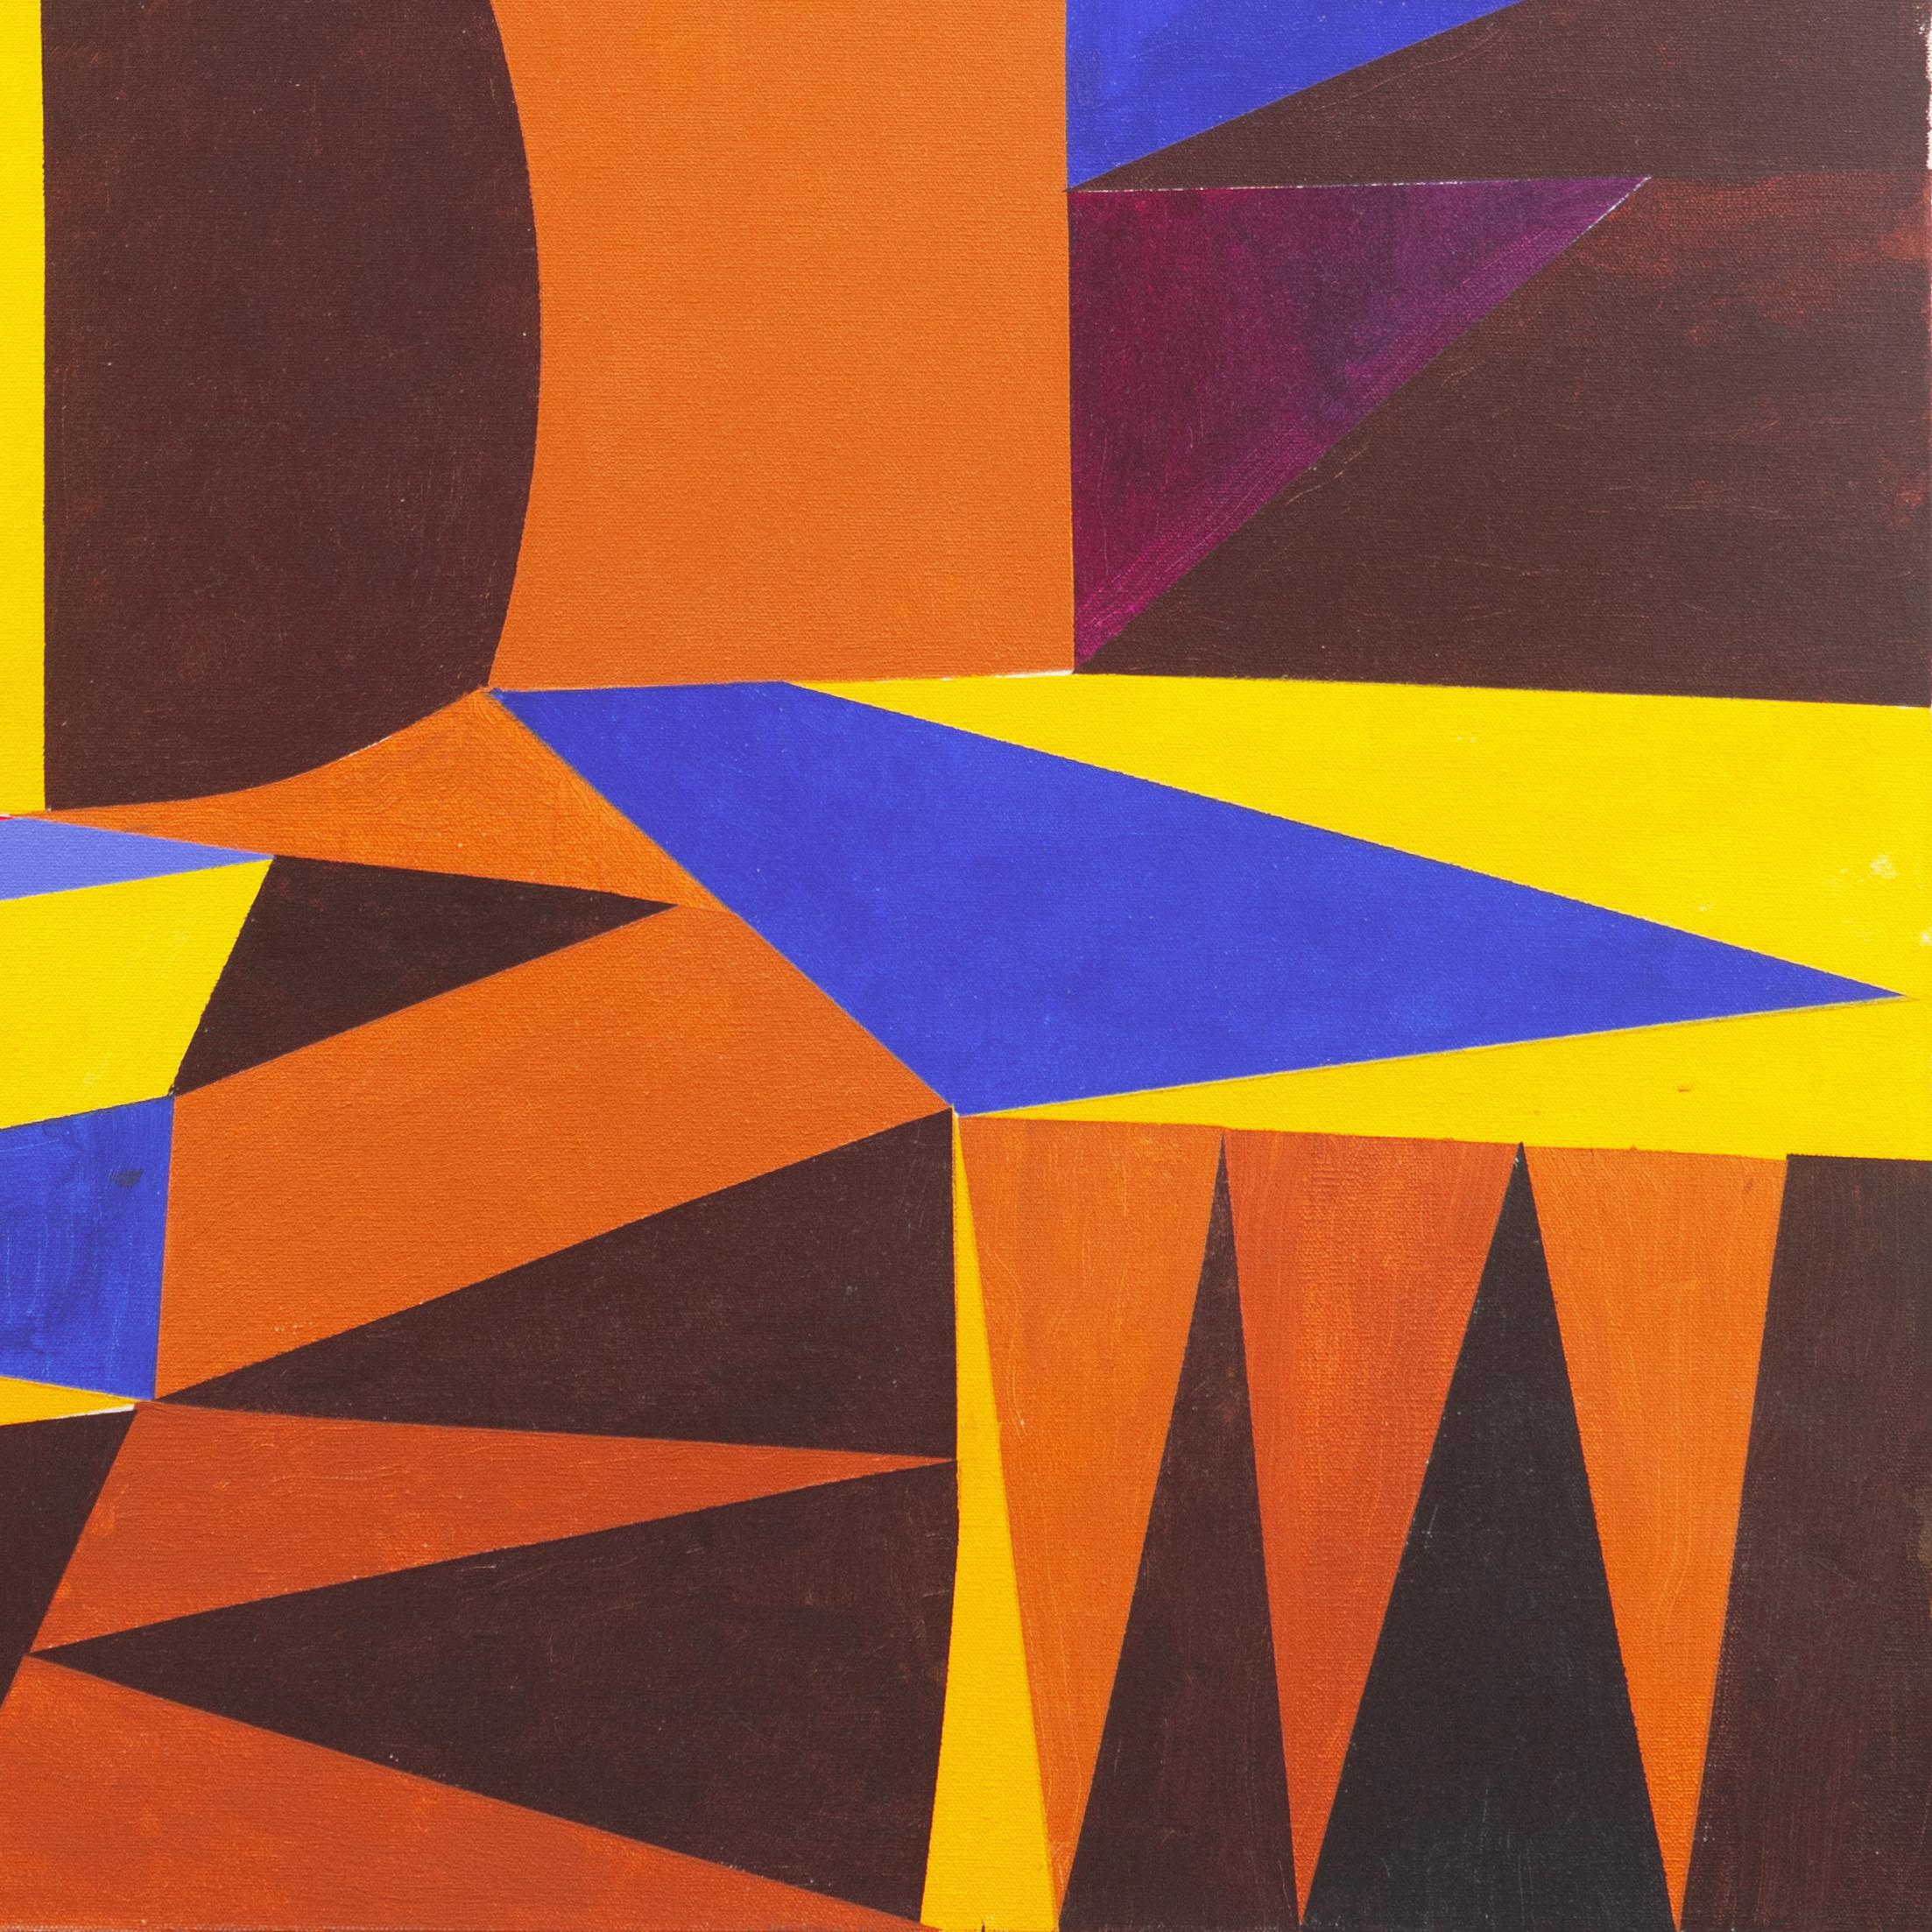 'Geometric Abstract I', Bay Area Abstraction, San Francisco Art Institute - Painting by Renee Harwin